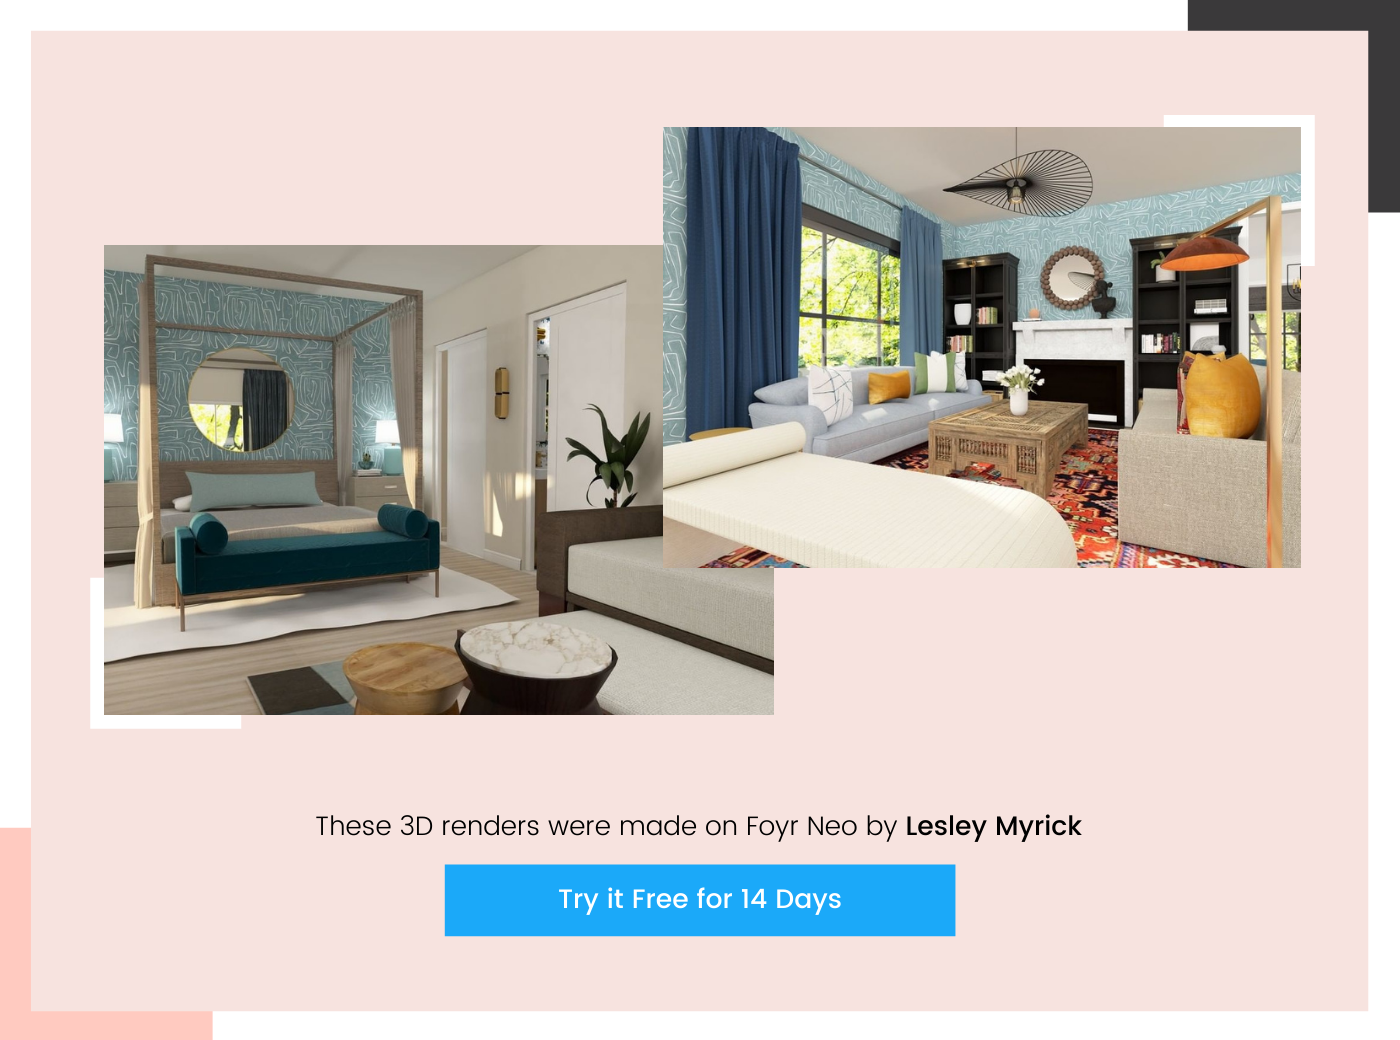 12 Best Free Home and Interior Design Apps, Software and Tools